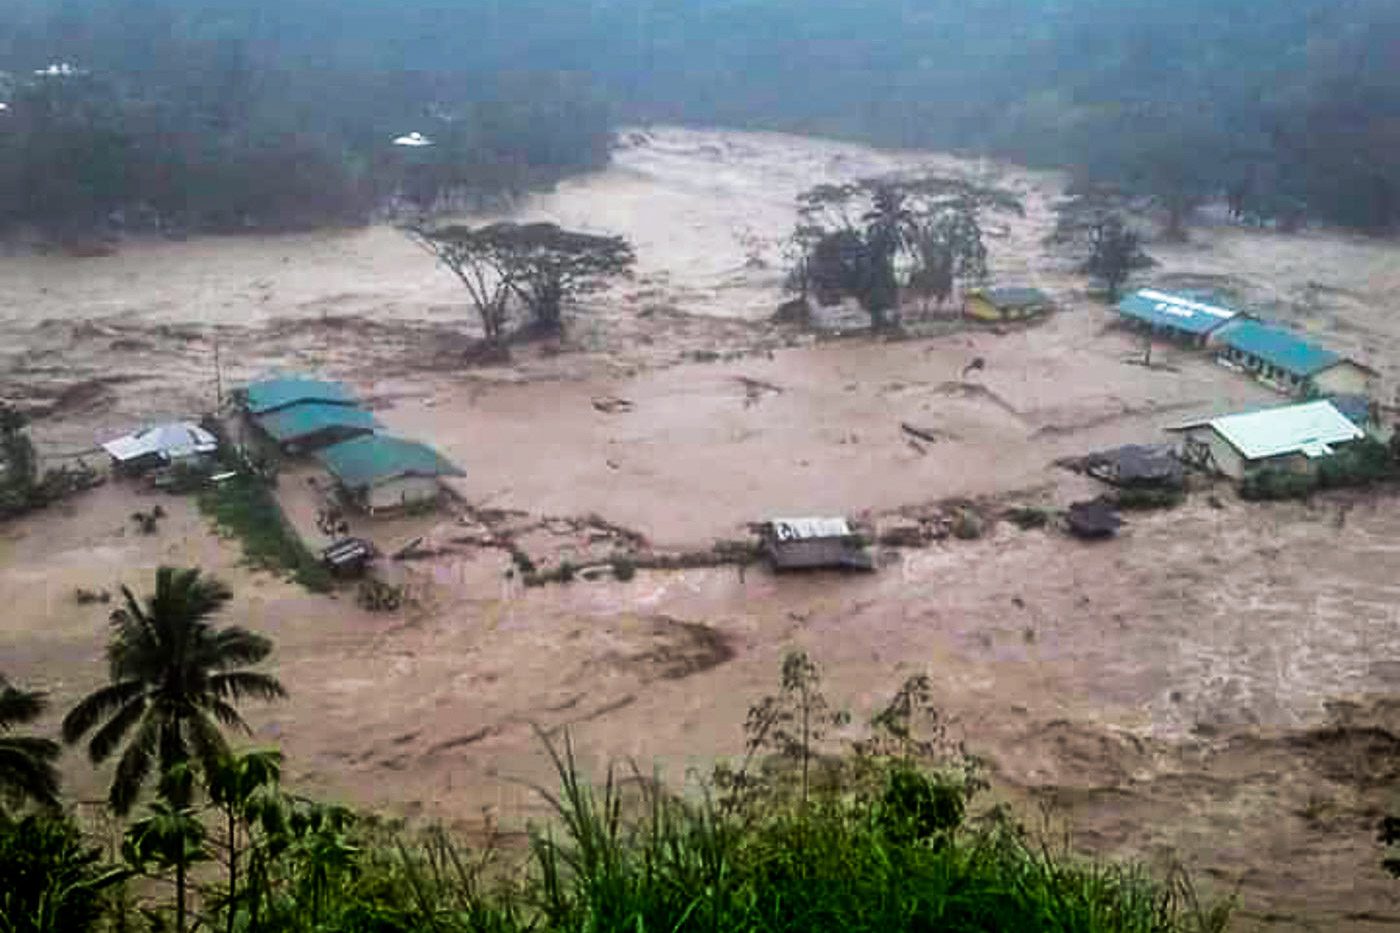 INUNDATED. Rains from Typhoon Rosita (Yutu) flooded the Dacalan and Lubo Elementary Schools in Tanudan, Kalinga on October 30, 2018. Photo by Peter Balconit  